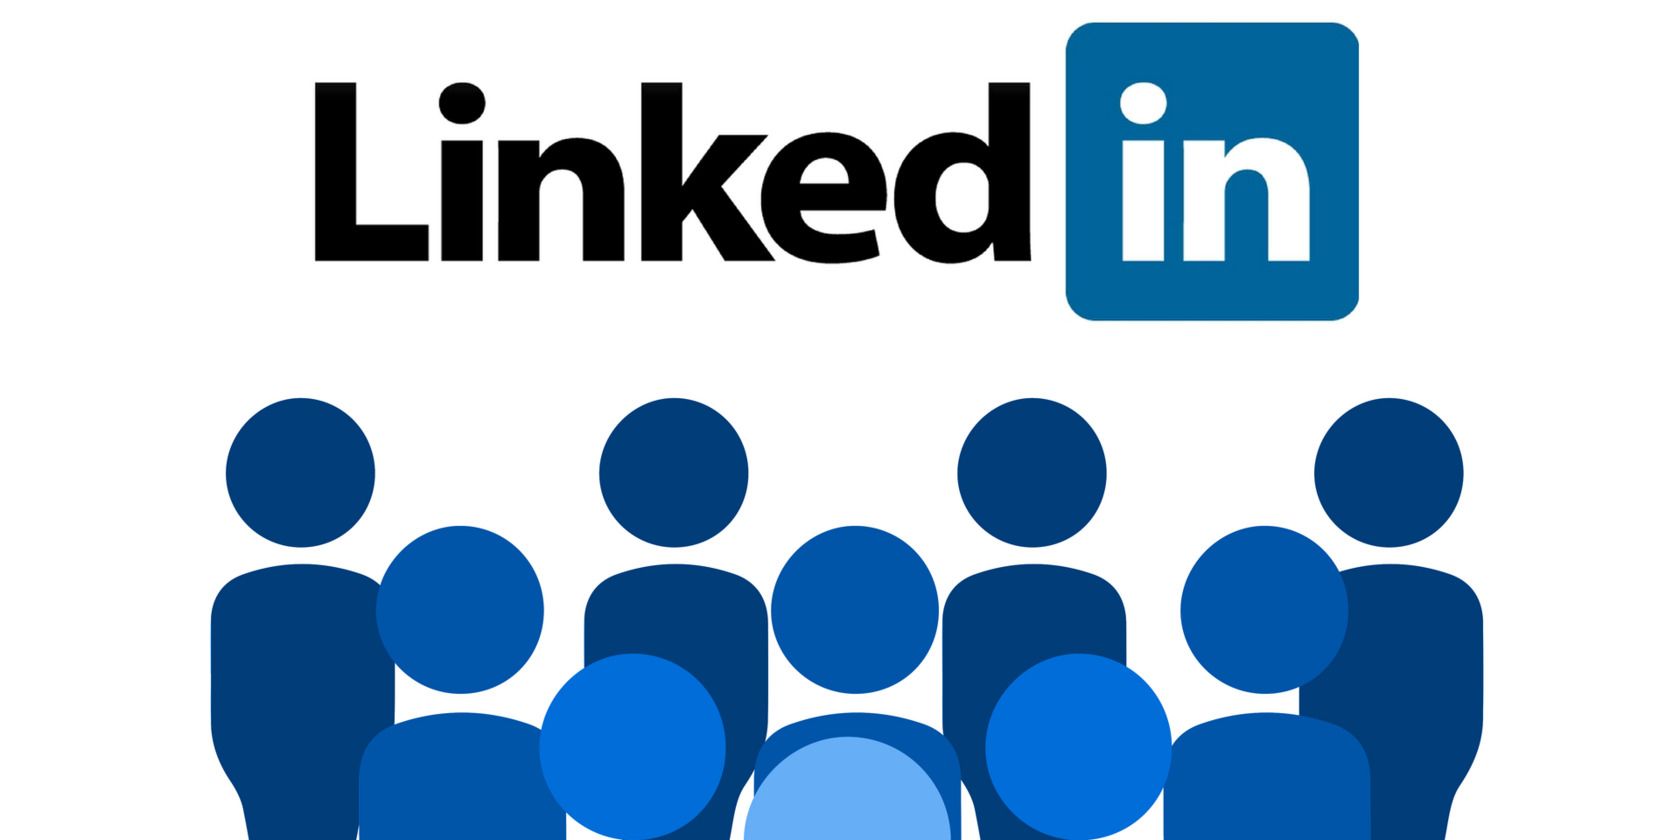 Linkedin Logo with a group of figures